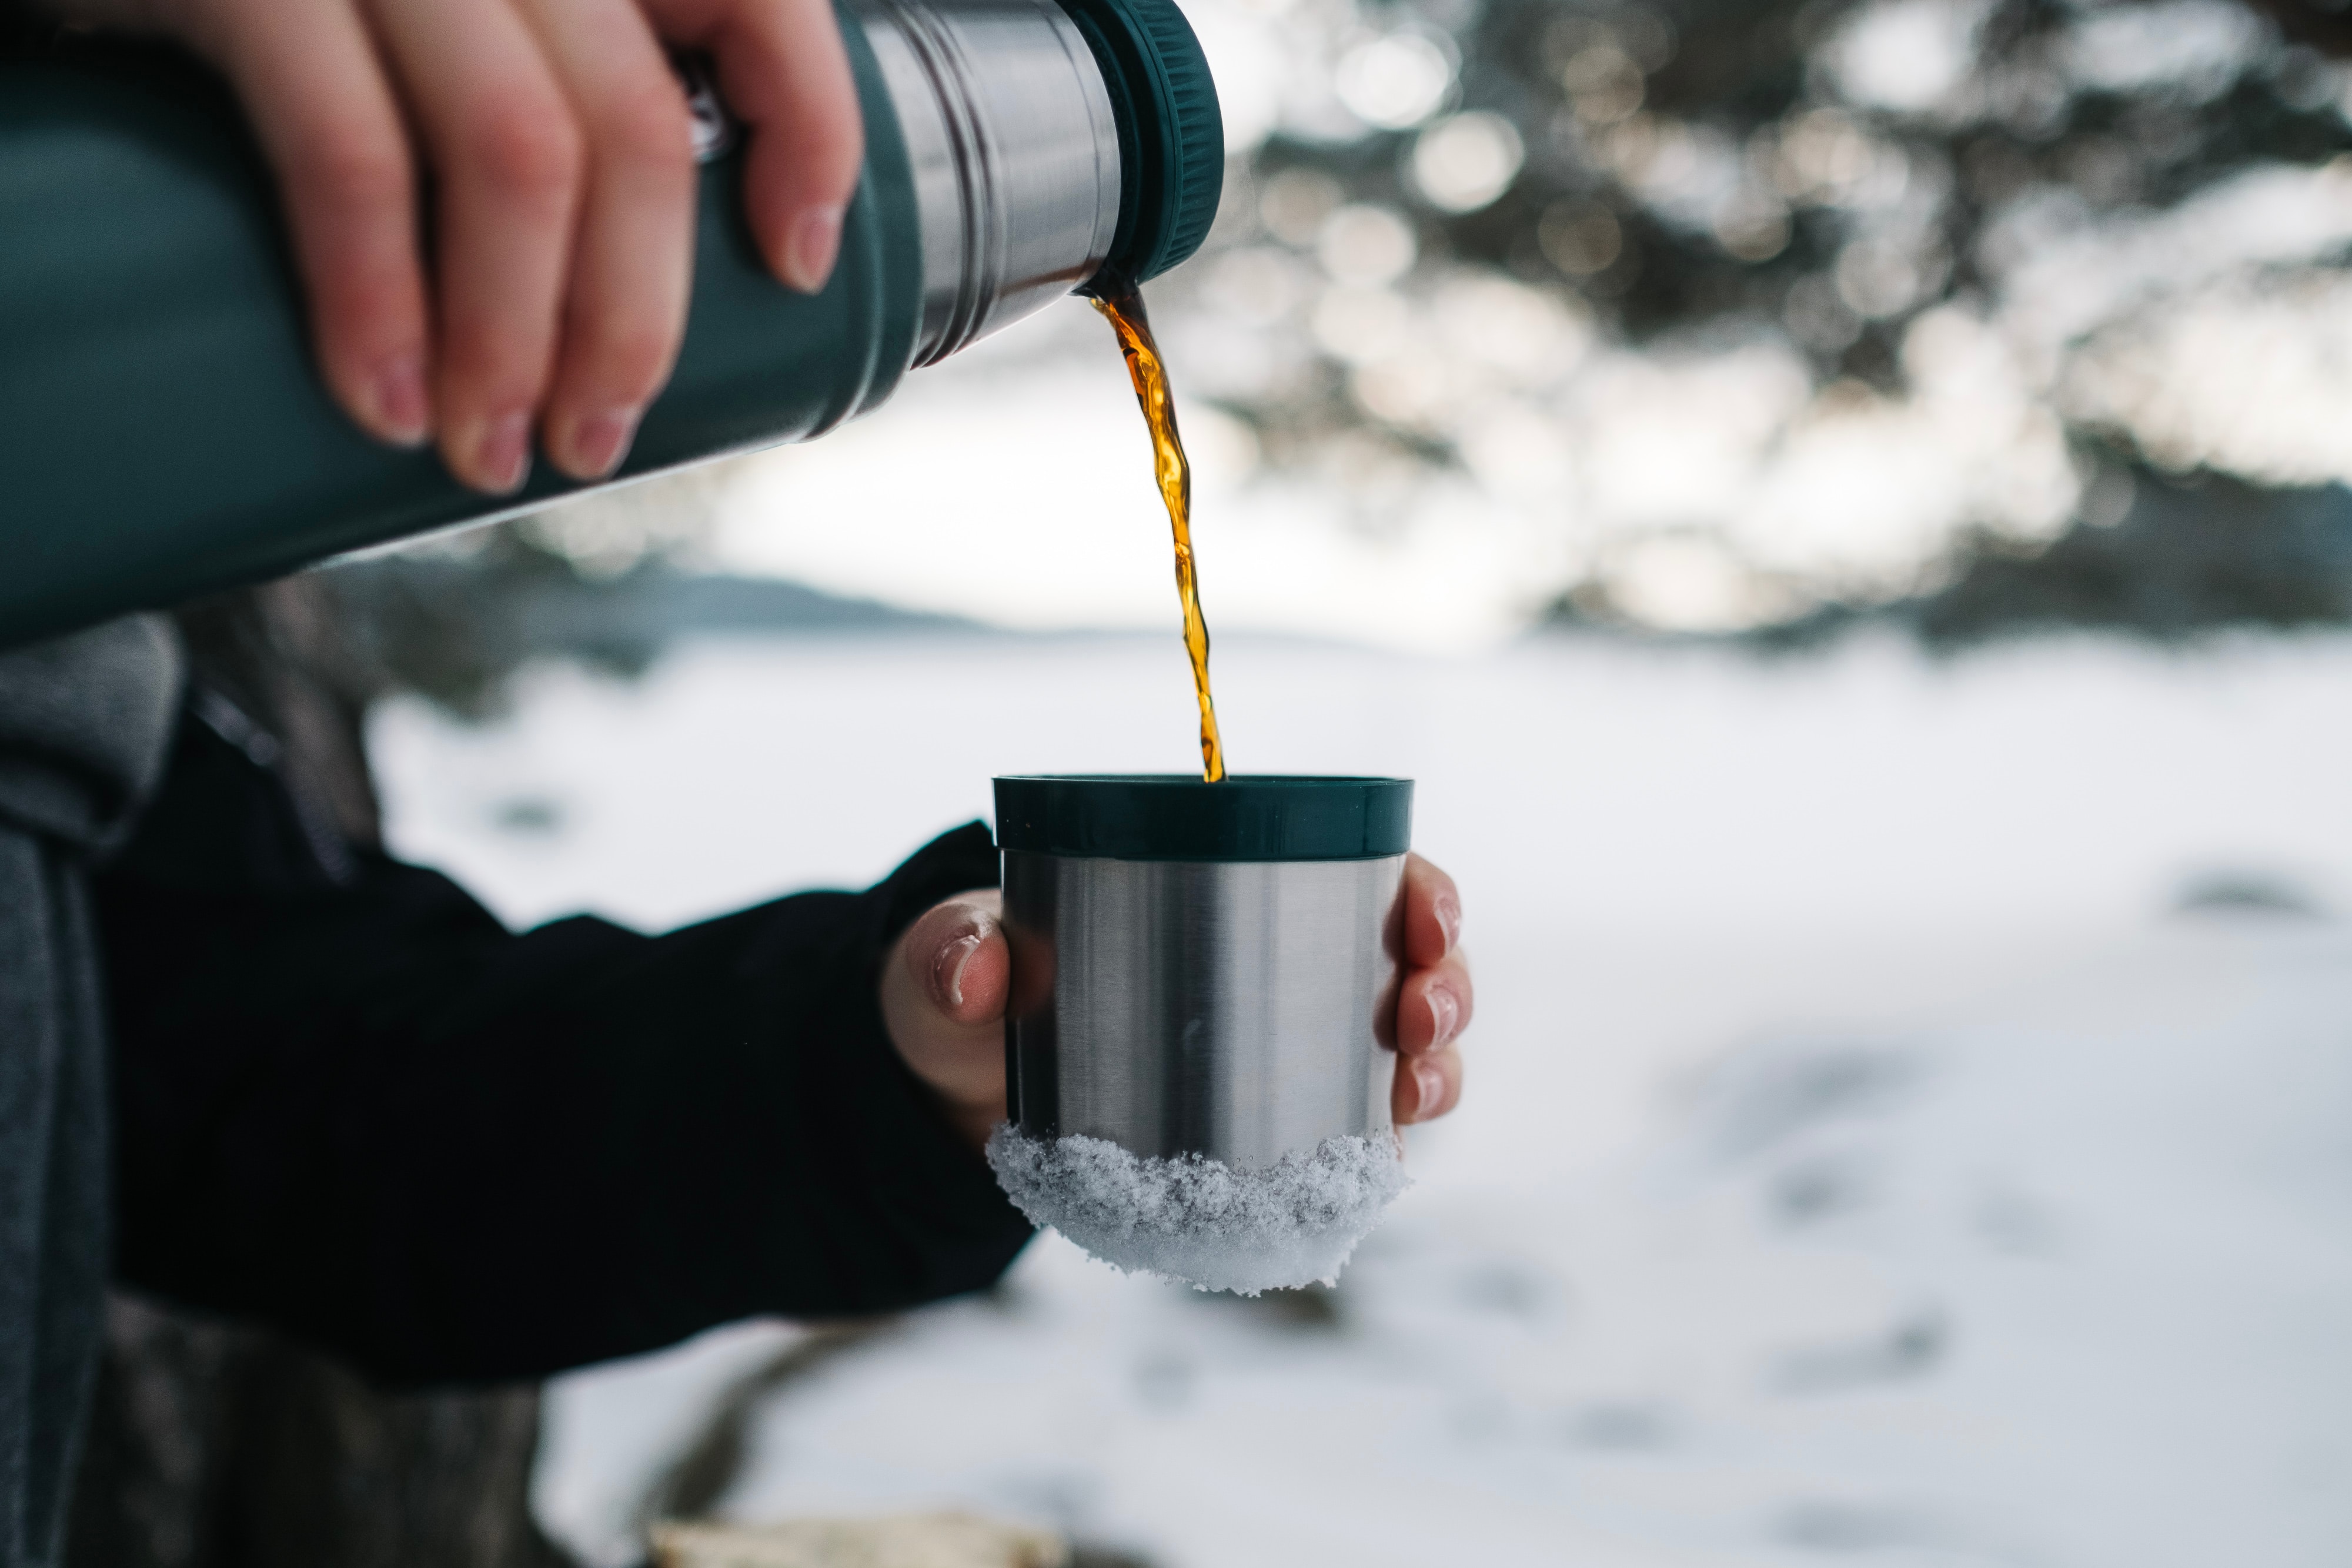 A warm drink in a Thermos makes even the coldest ride more pleasant. Photo by Jonas Jacobsson on Unsplash